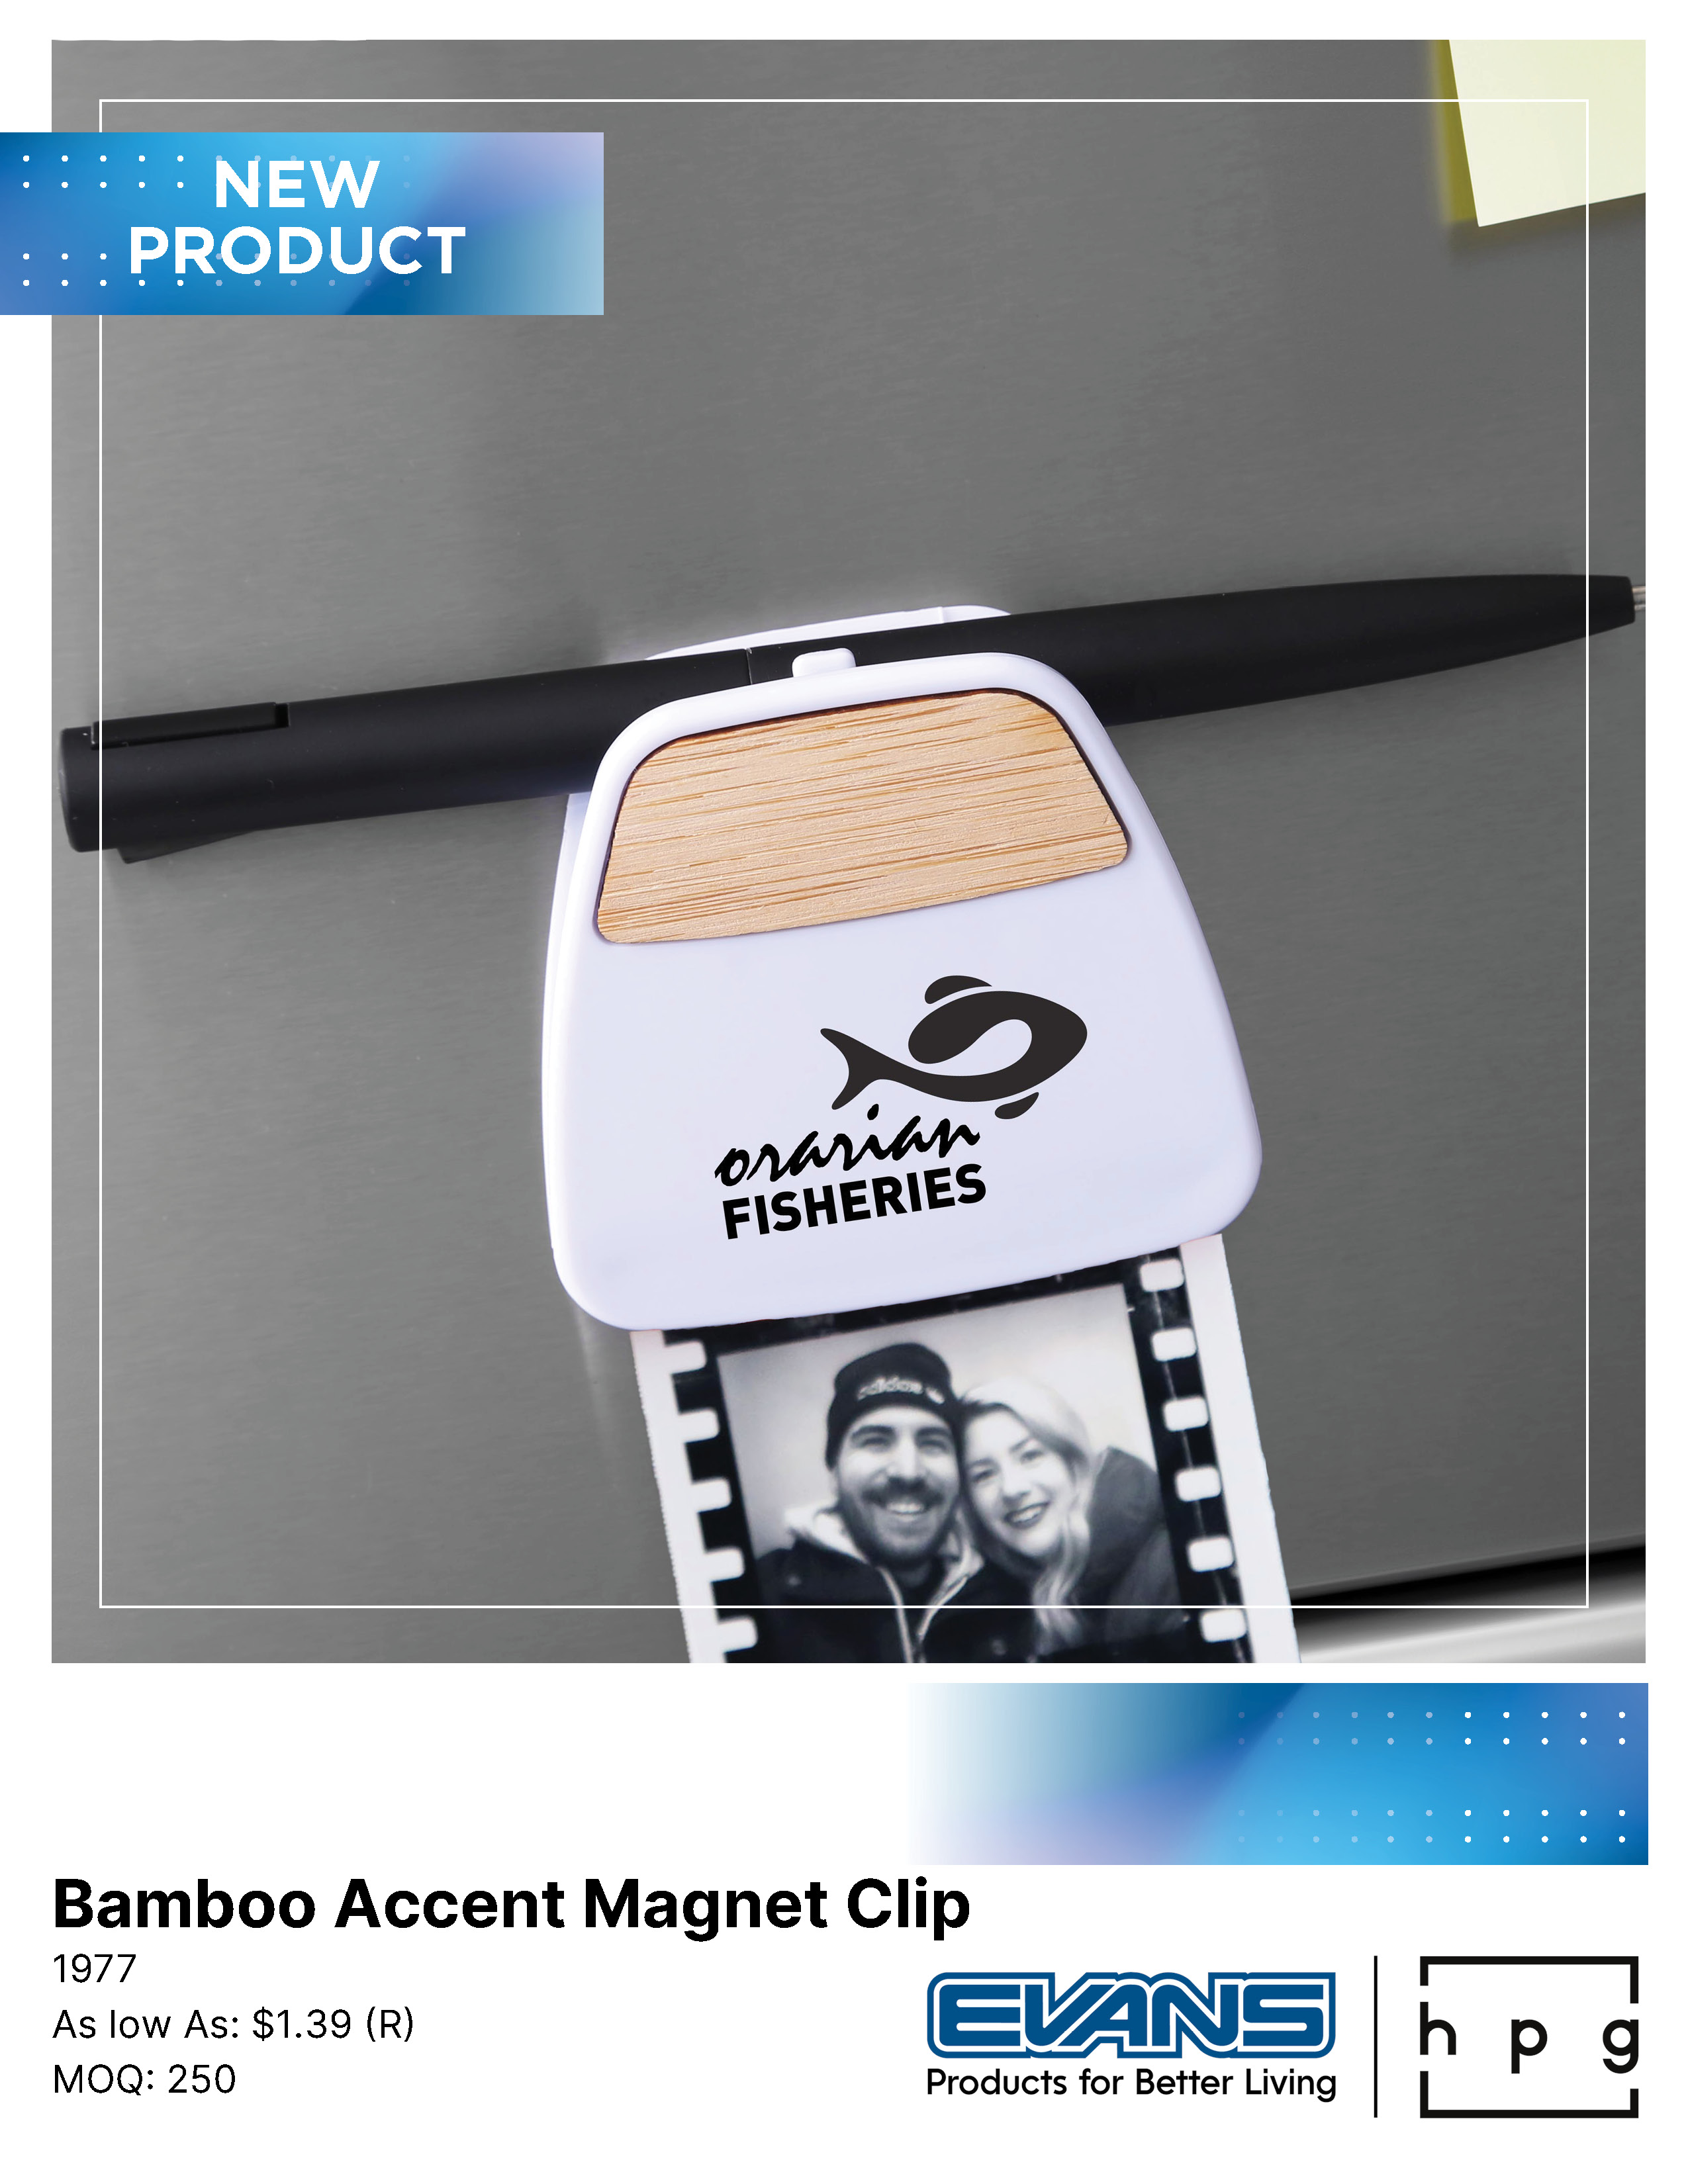 1977 Bamboo Accent Magnet Clip